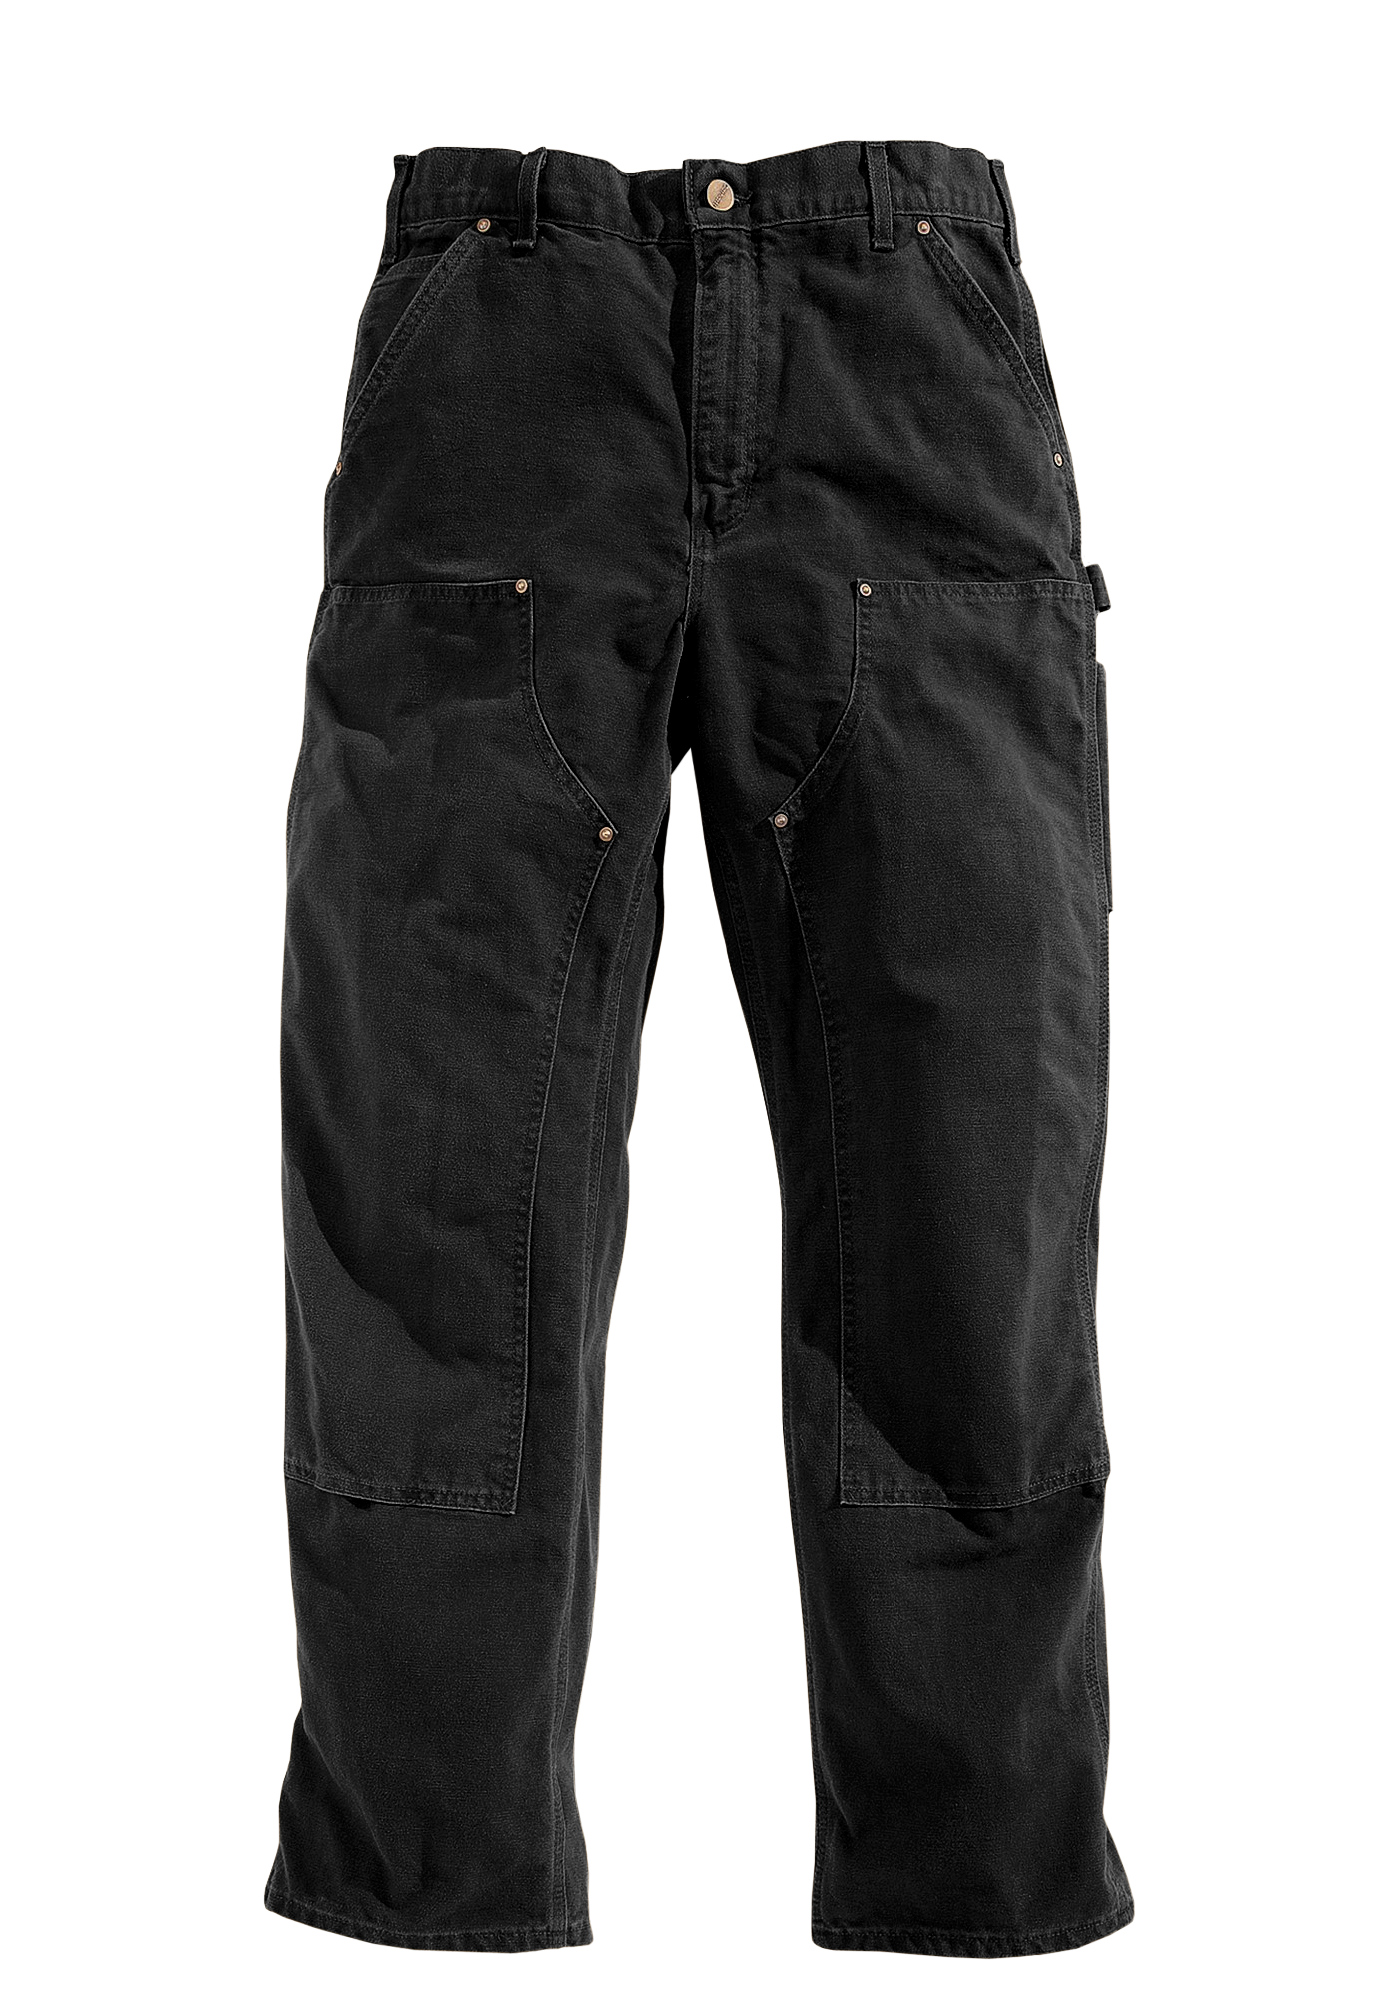 Carhartt Men's Big & Tall Loose Fit Firm Duck Double-Front Utility Work Pant